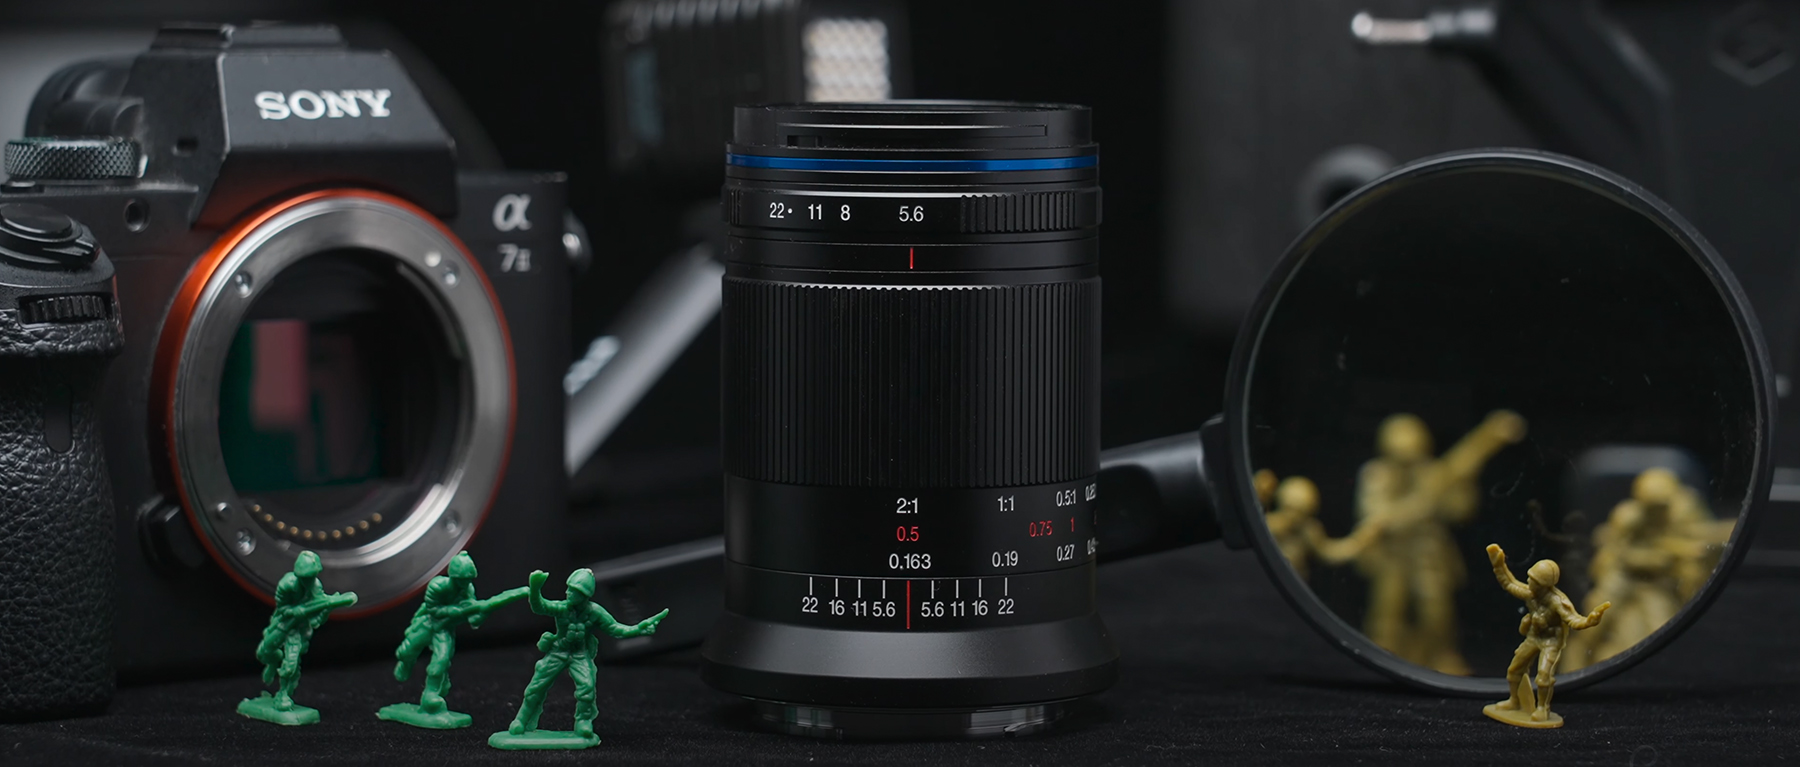 Laowa 85mm f/5.6 2X Ultra Macro Lens for L-Mount Released | CineD